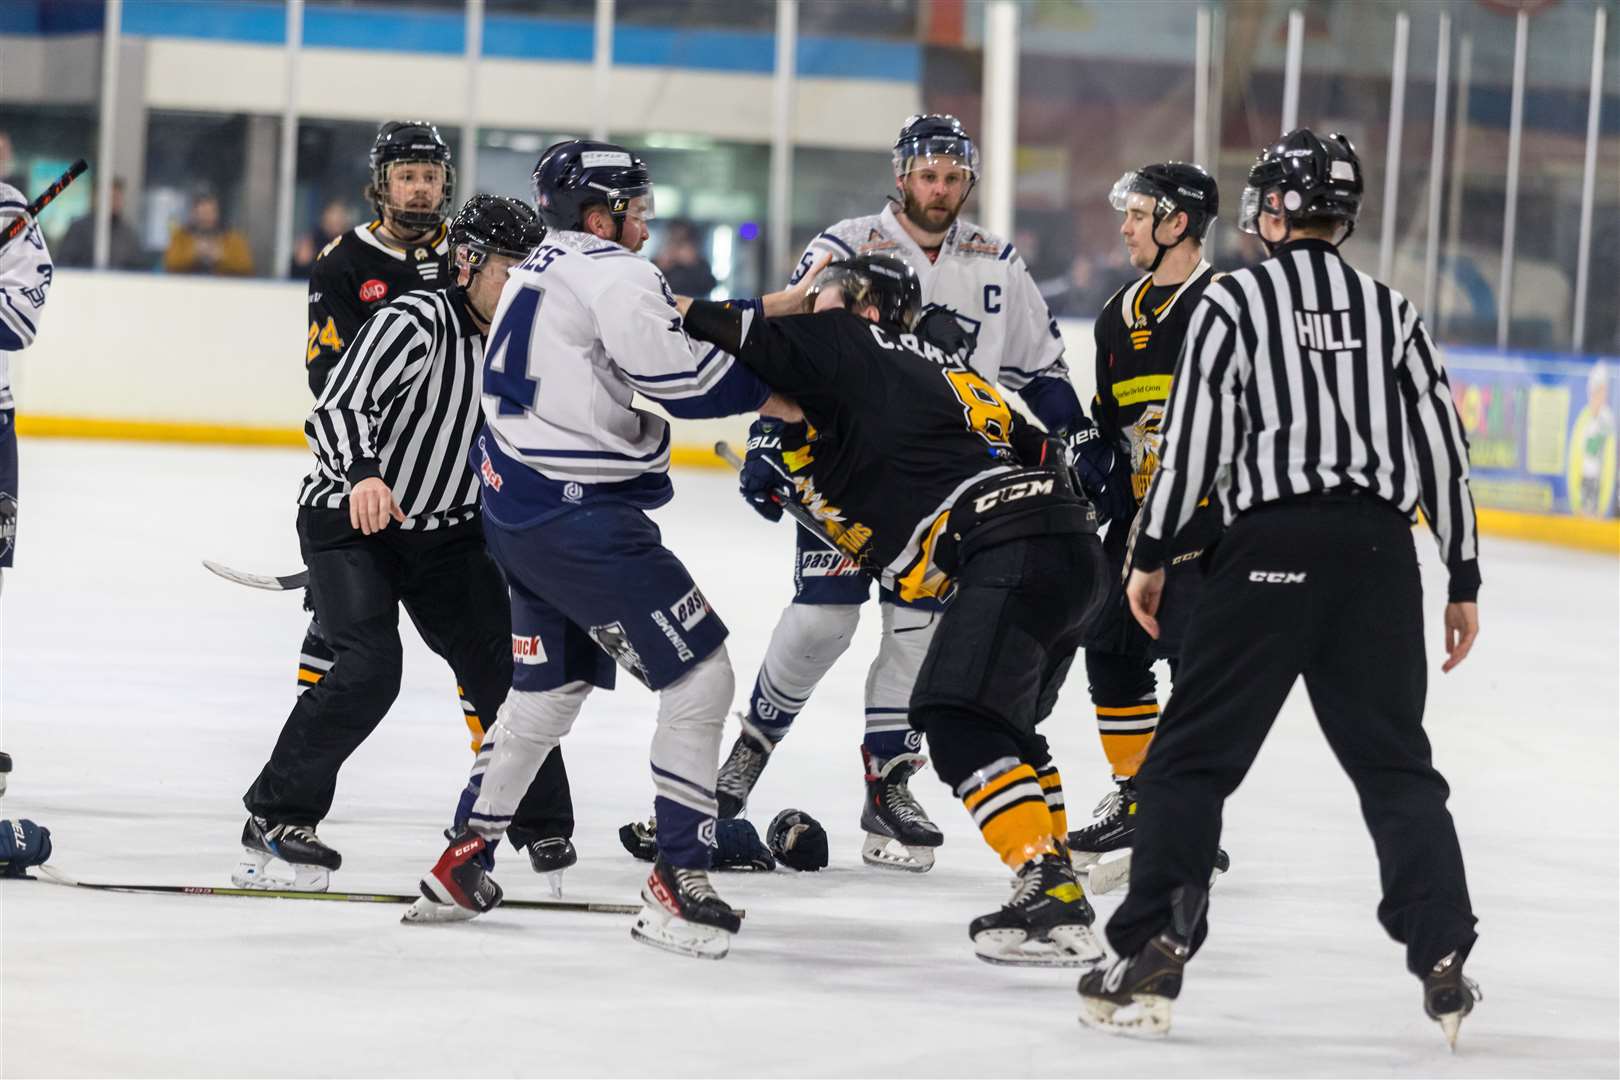 Match action between Invicta Dynamos and Chelmsford Chieftains Picture: David Trevallion